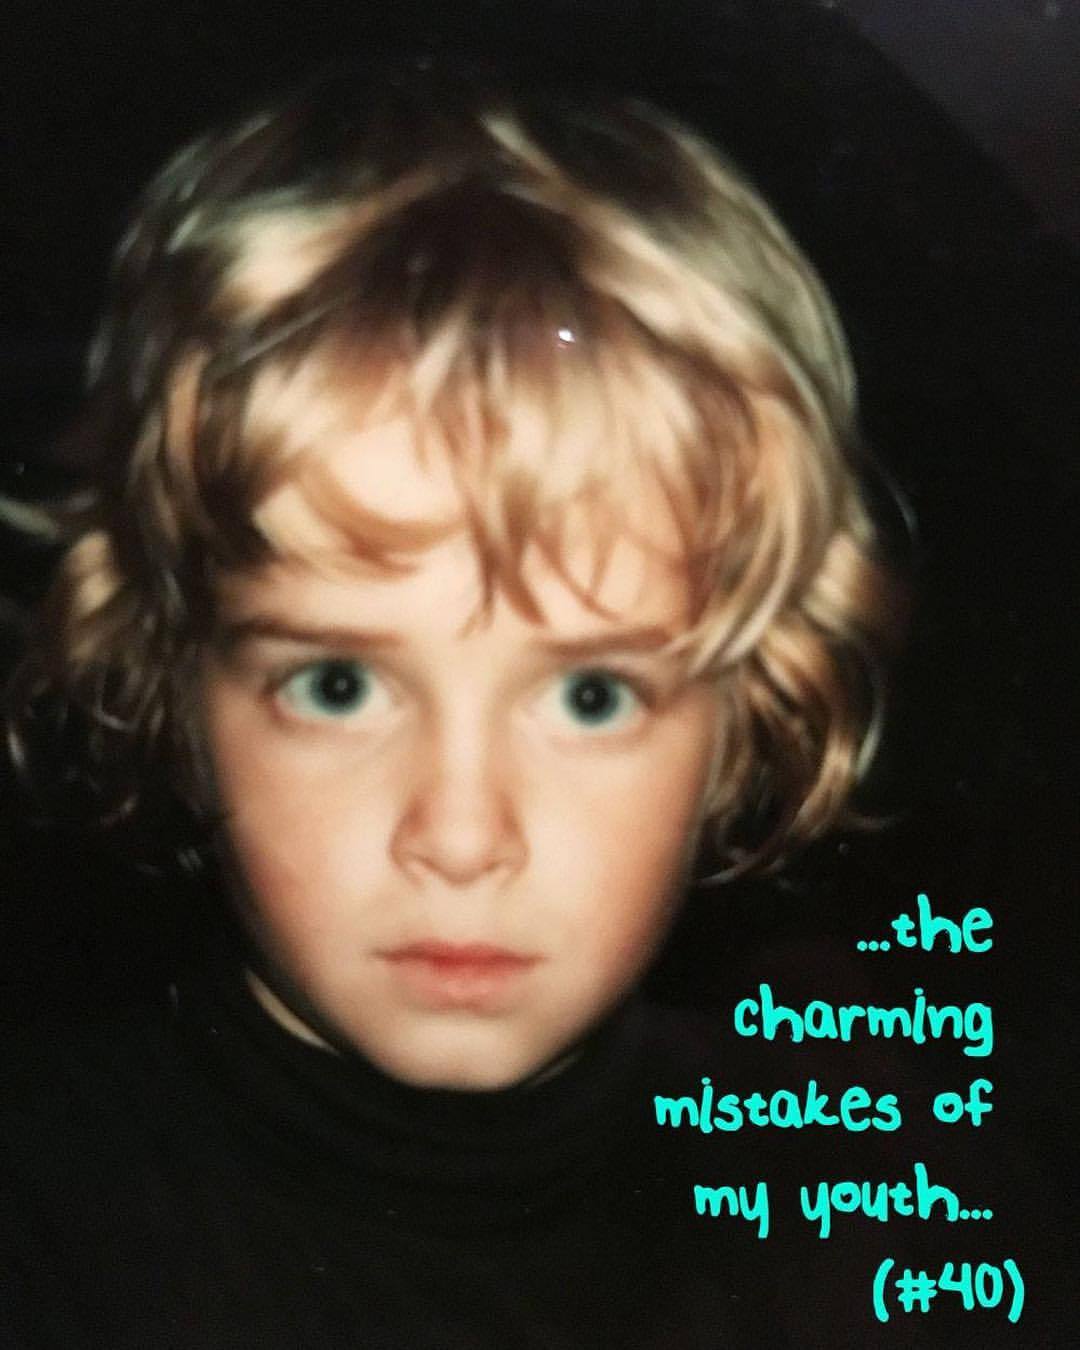 TONITE …the charming mistakes of my youth (#52) Thursday, Jan 16th,  8-9pm PST special guest: @sylvain_couzinetjacques #music #nostalgia…